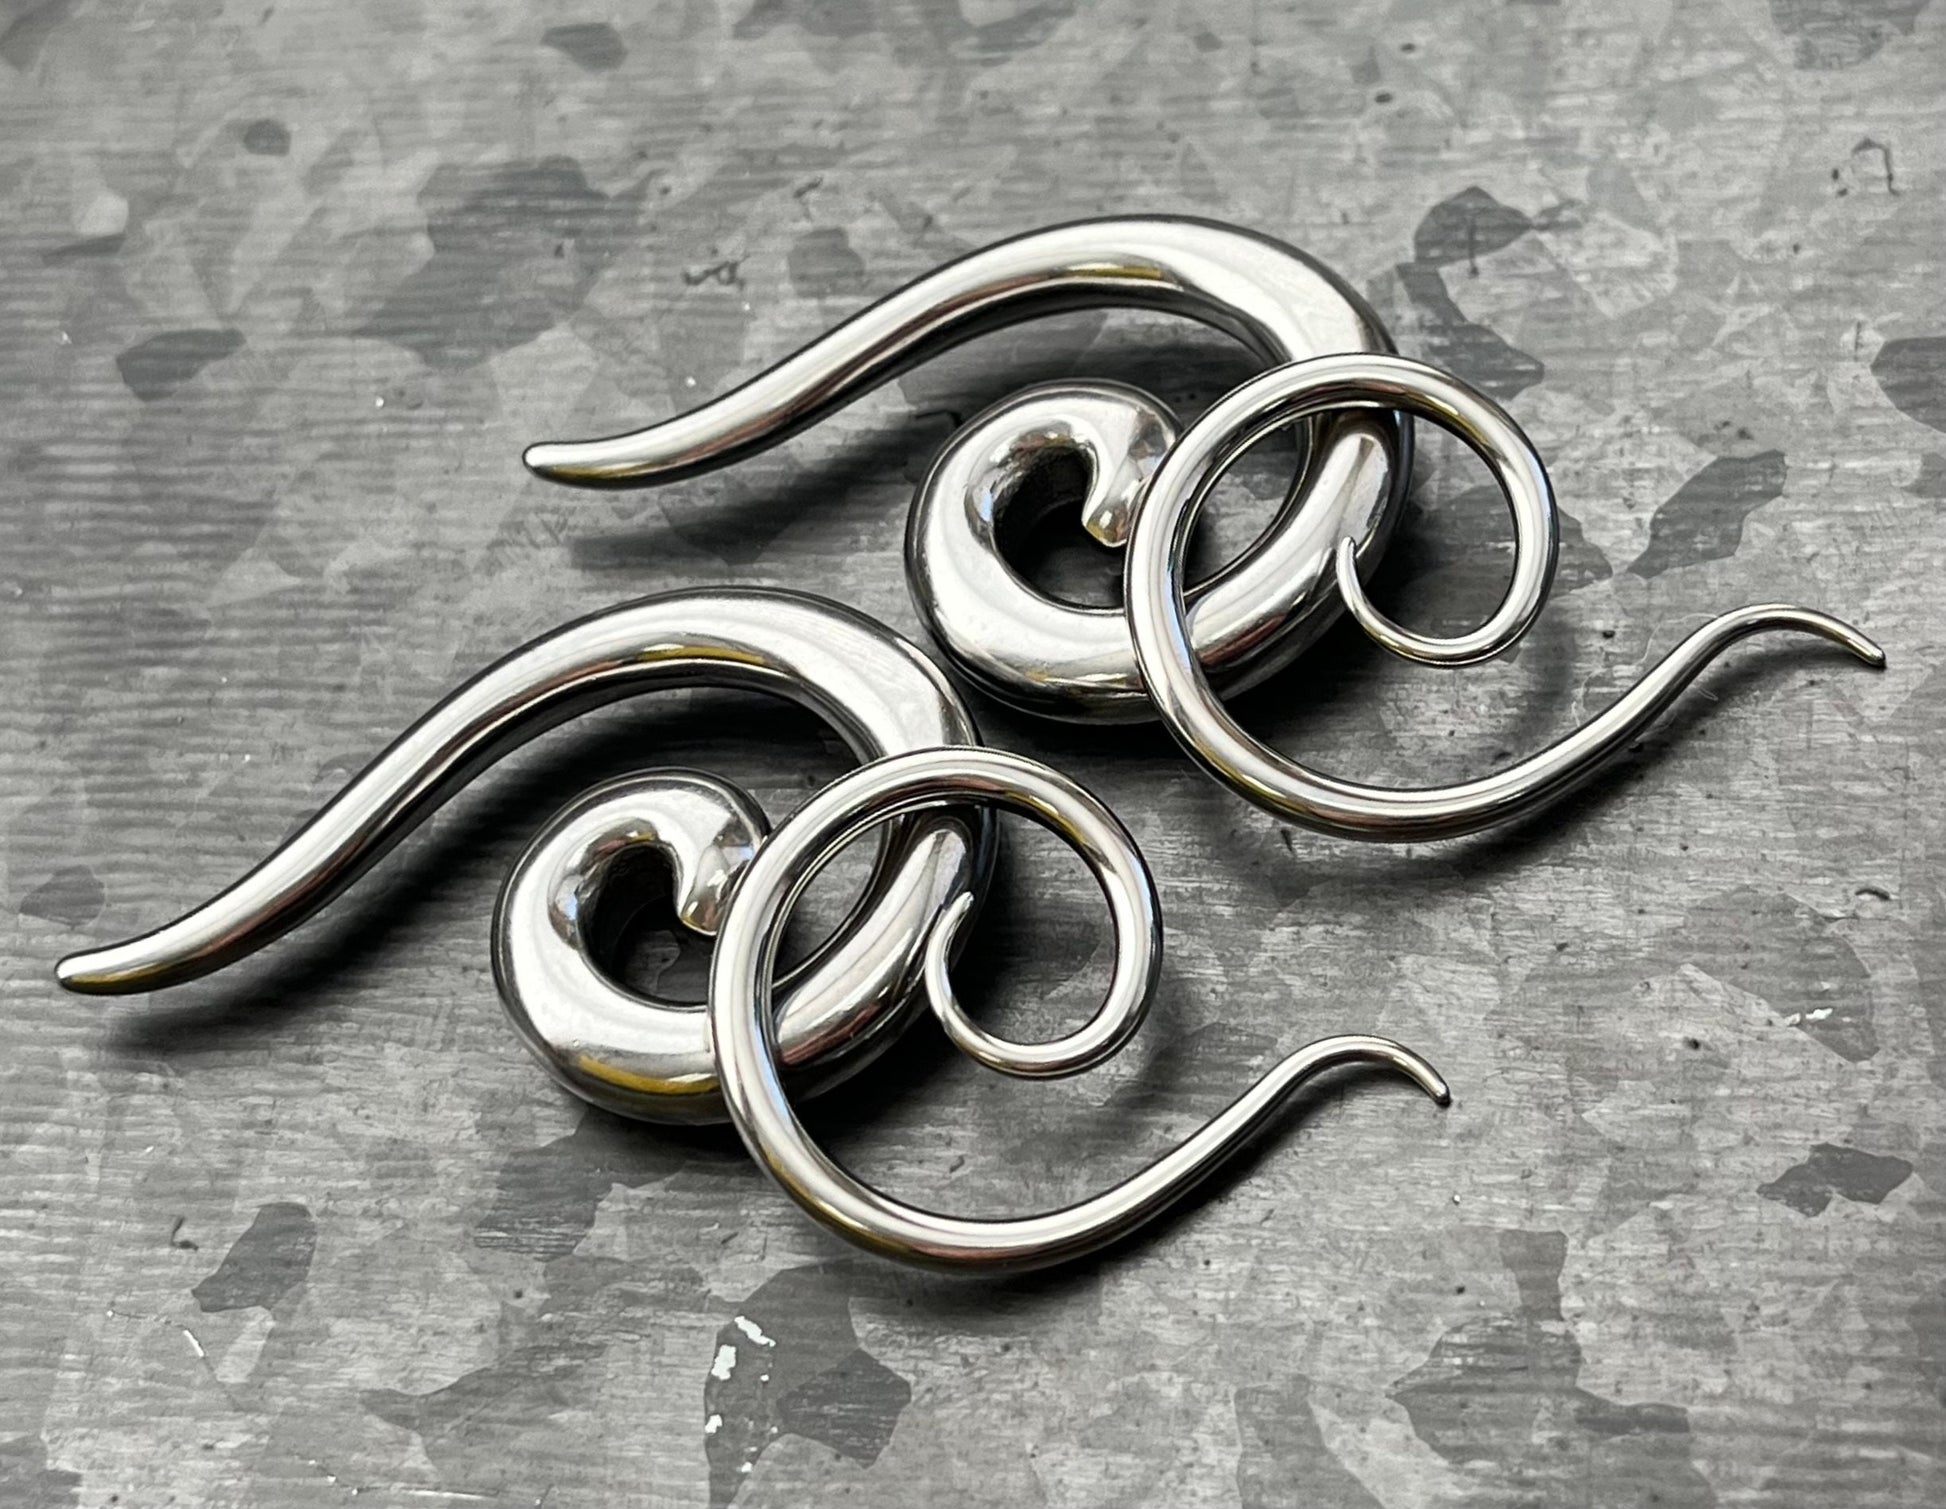 PAIR of Beautiful Surgical Steel Spiral Hanging Tapers Expanders - Gauges 12g (2mm) thru 2g (6mm) available!